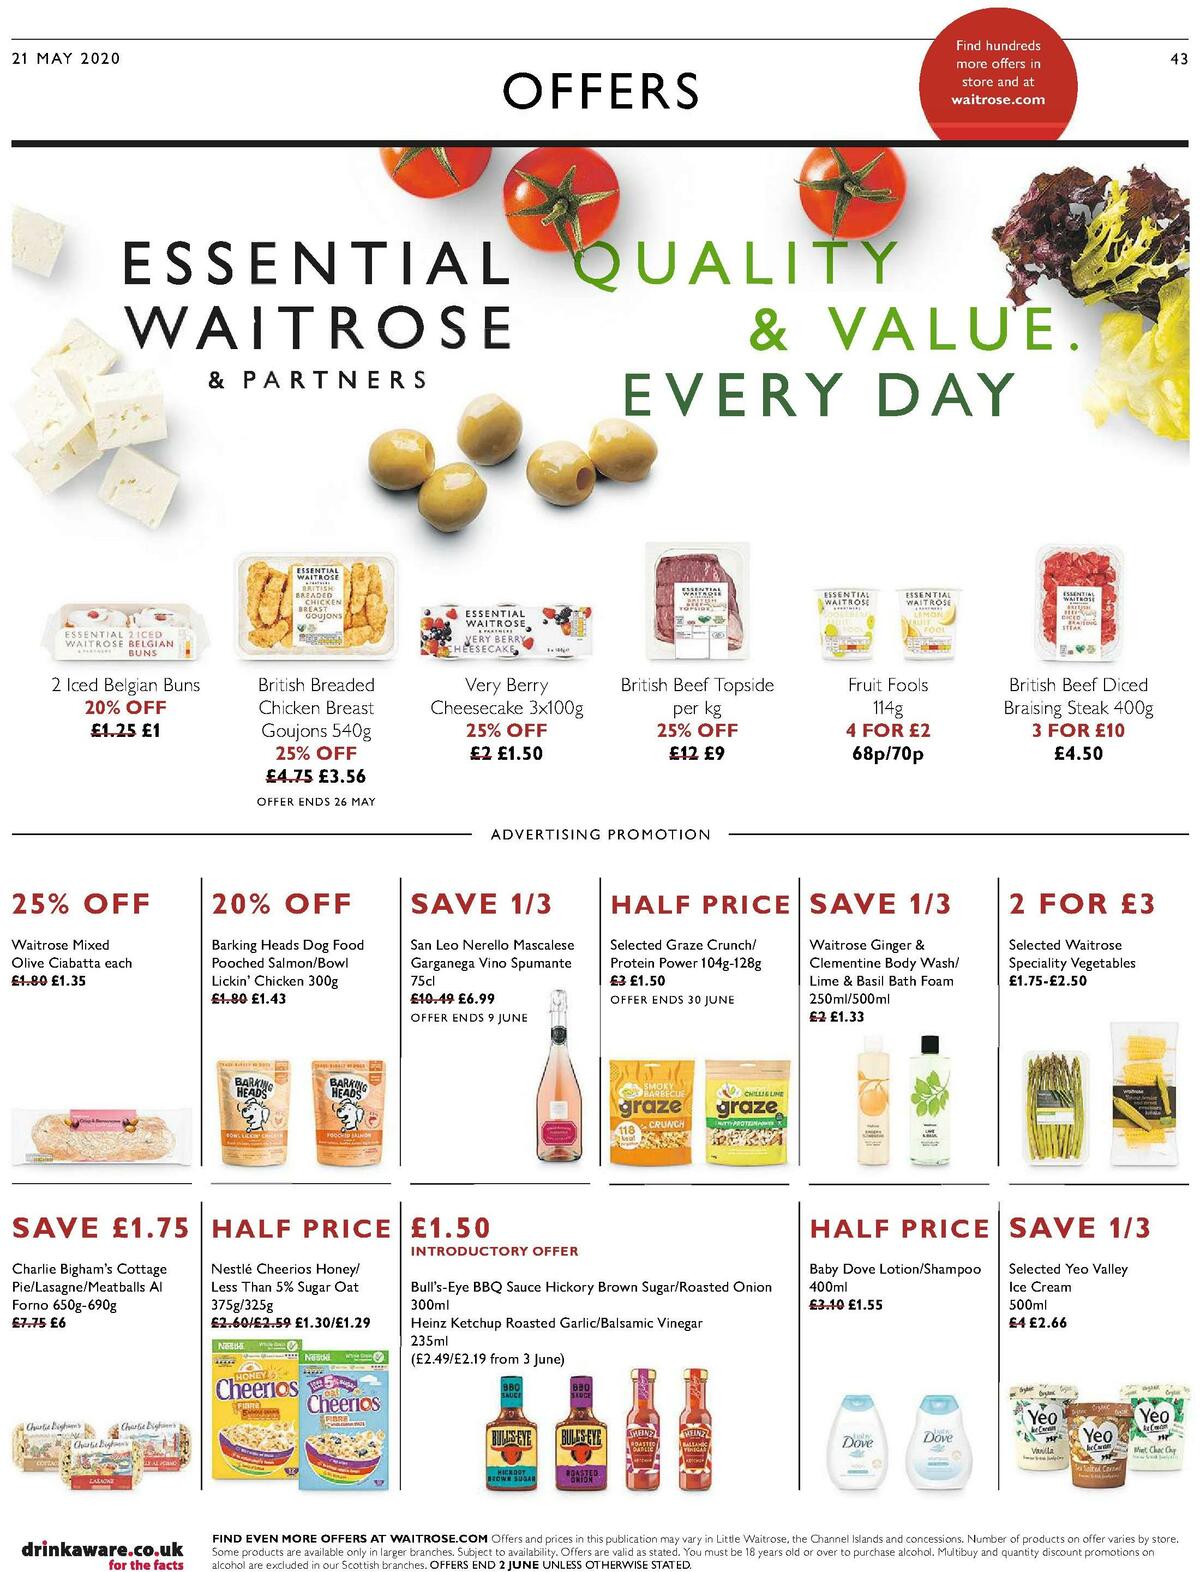 Waitrose Offers from 21 May